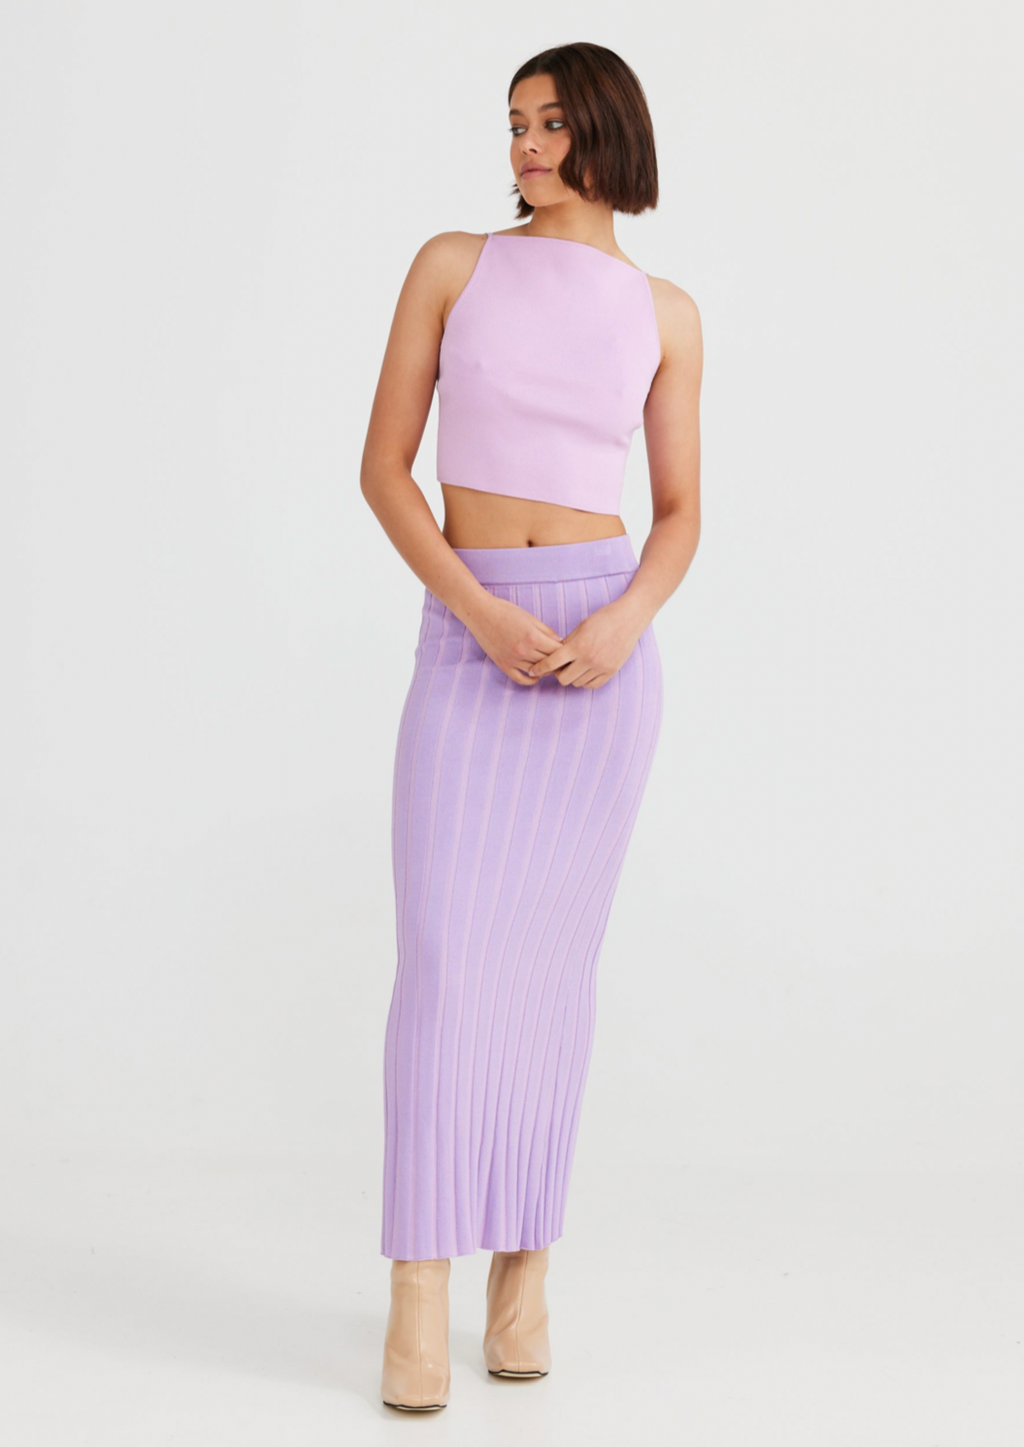 Lola Skirt - Lilac, by Daisy Says Features:  ELASTIC WAIST TWO-TONE RIBBED KNIT DESIGN FIGURE SKIMMING SILHOUETTE MAXI LENGTH  Sizing:  Waist - S - 68cm, M - 73cm, L - 78cm  Fabric + Care:  75% VISCOSE 25% POLYESTER  COLD DELICATE MACHINE WASH                                   WITH LIKE COLOURS DO NOT BLEACH, SOAK OR RUB (X) DO NOT TUMBLE DRY (X) LINE DRY IN SHADE WITHOUT DELAY WARM IRON INSIDE OUT DO NOT DRY CLEAN (X)